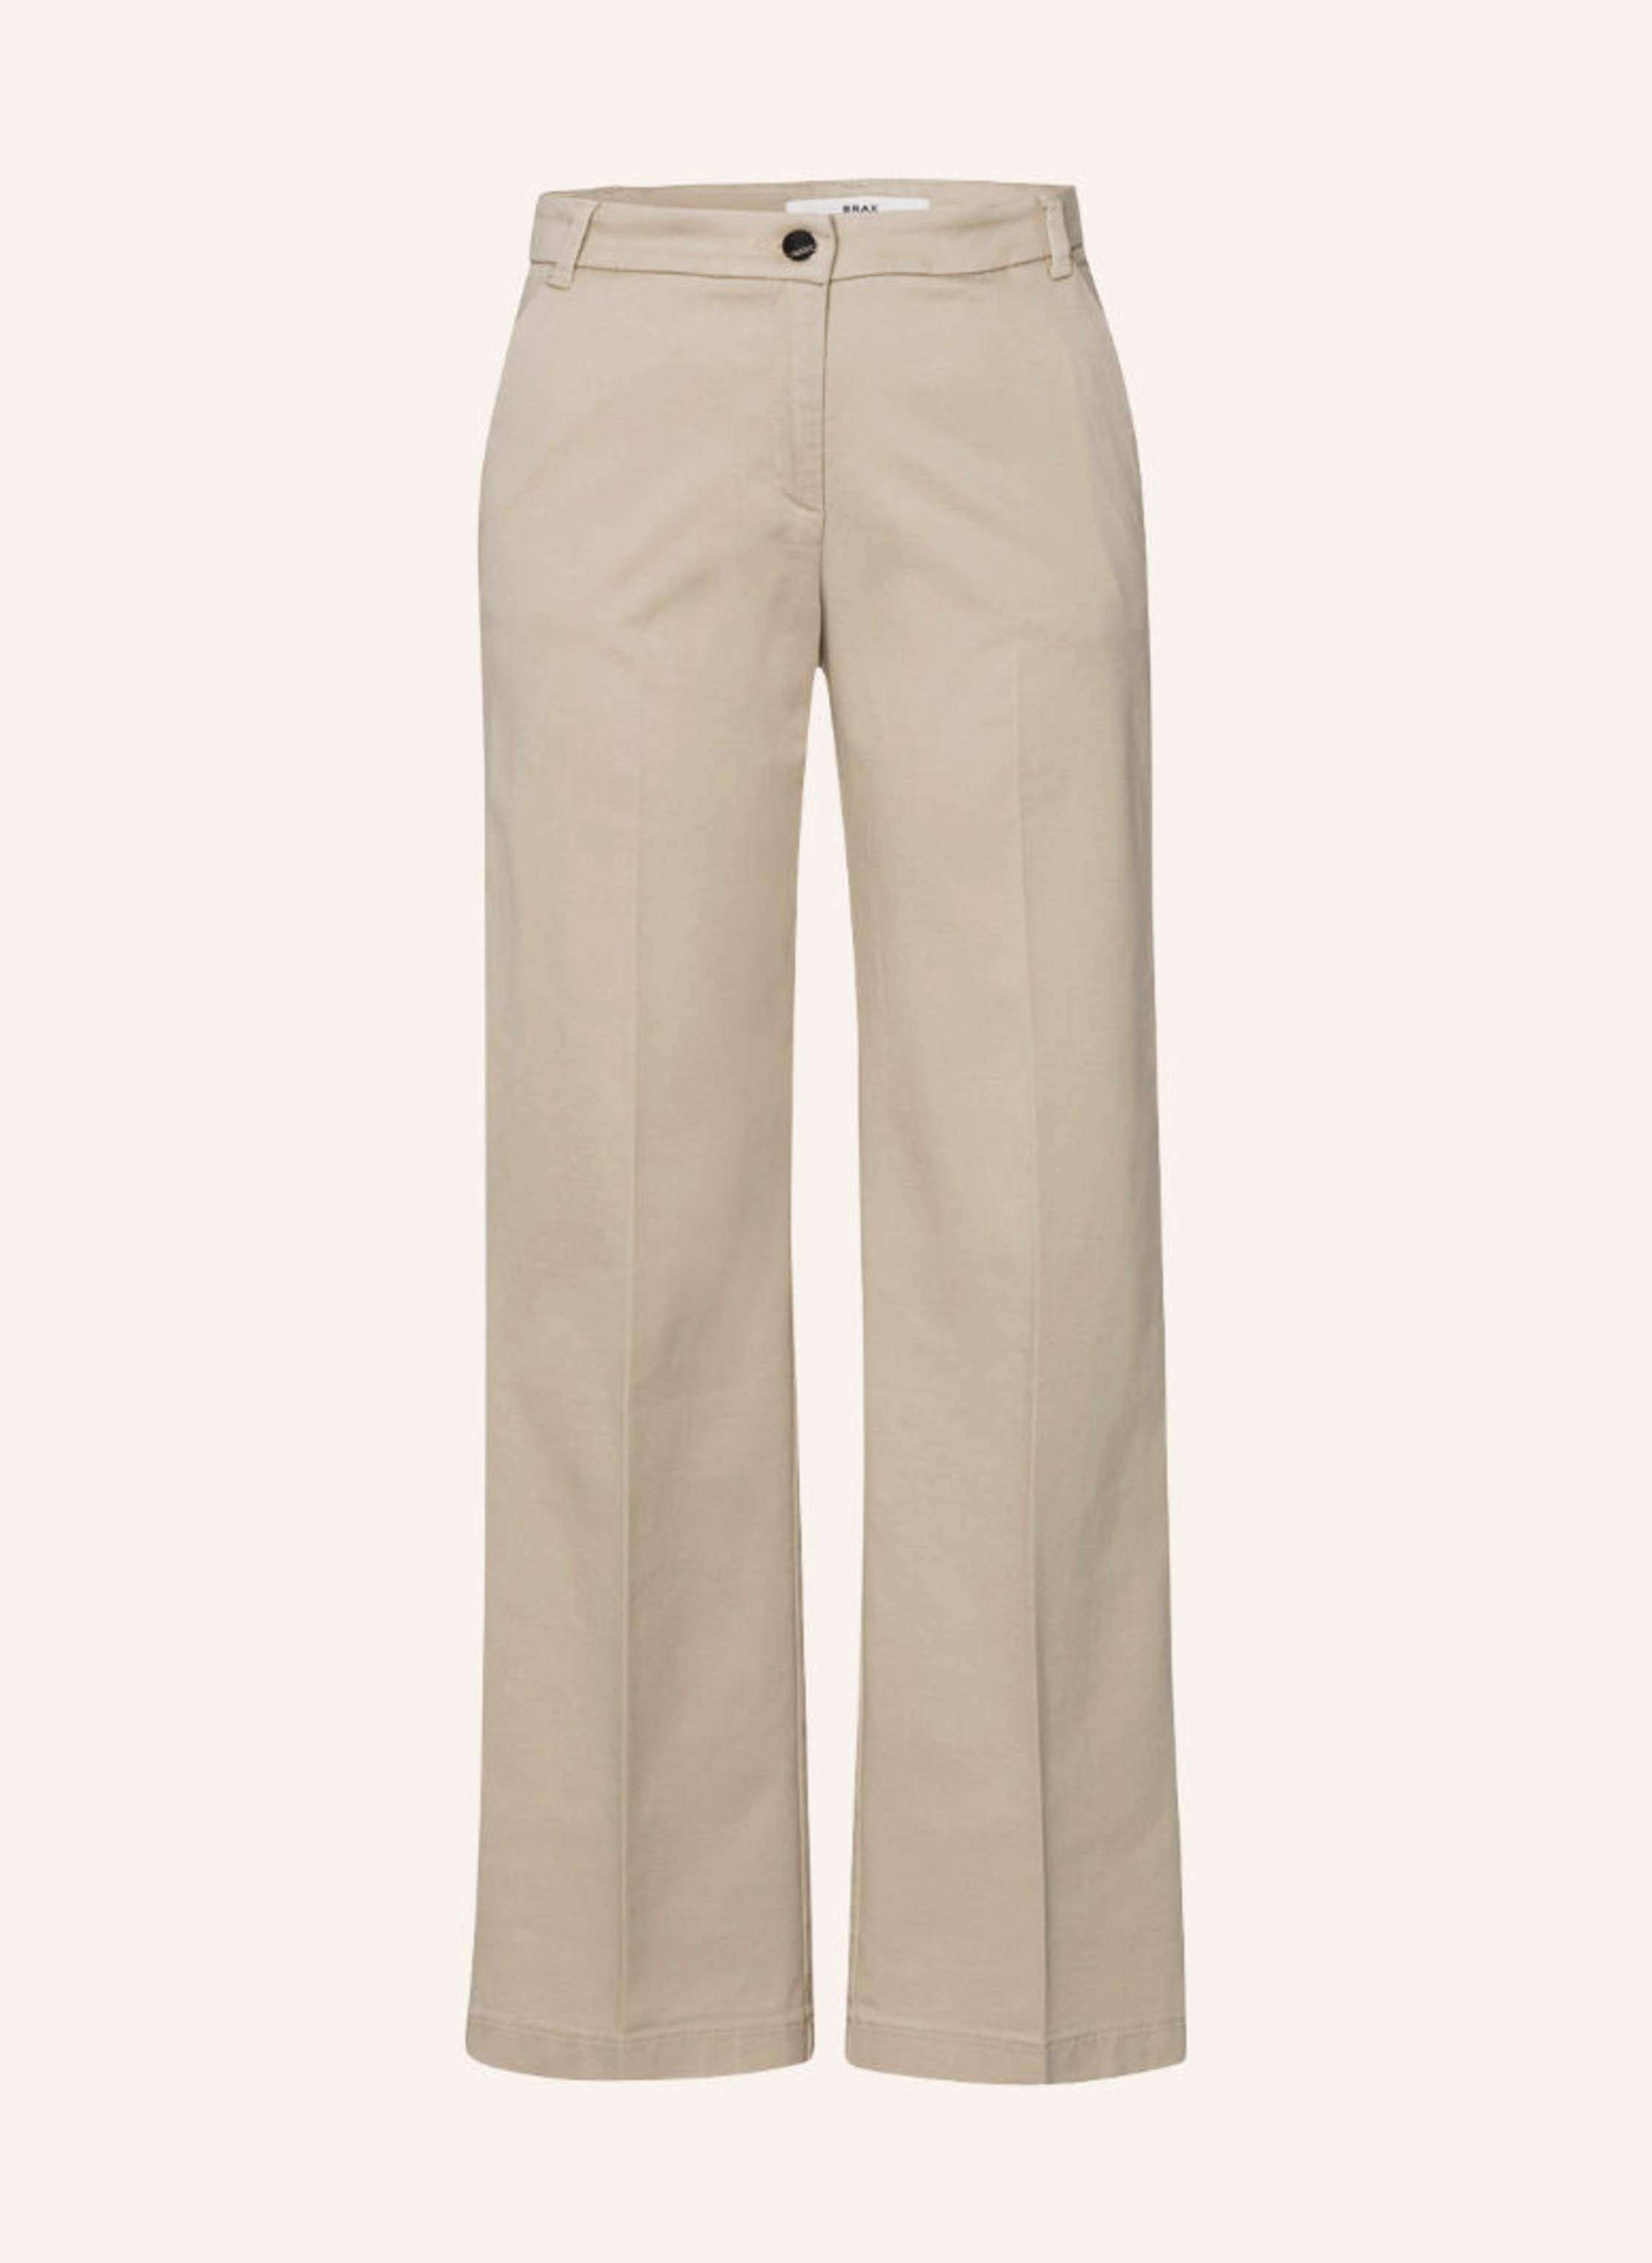 BRAX Palazzohose beige MAINE in STYLE